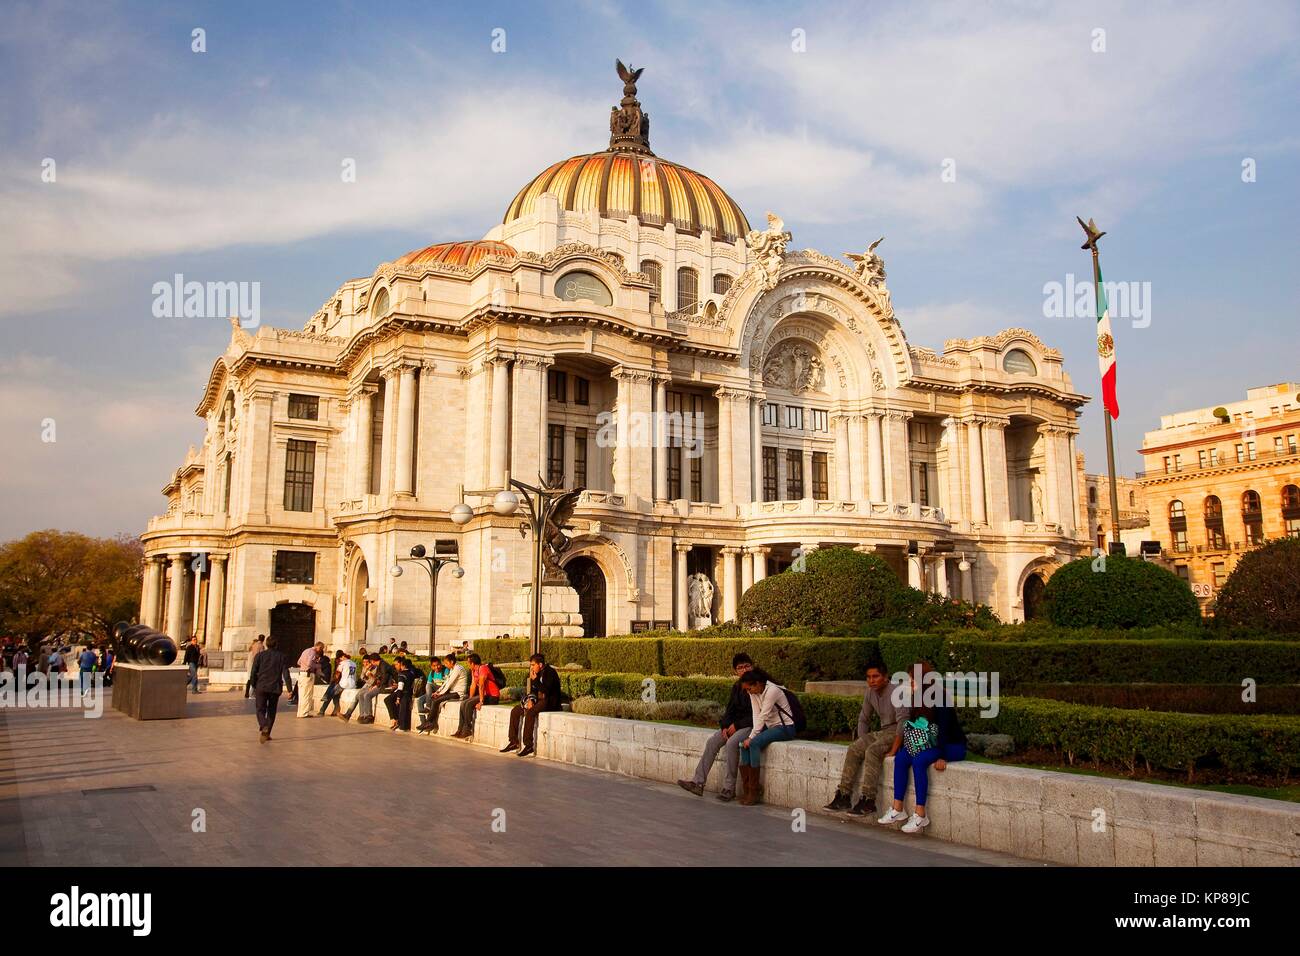 View to the Palacio De Las Bellas Artes-Palace Of Fine Arts with people  sitting in the foreground, Mexico City, Mexico, Central America Stock Photo  - Alamy